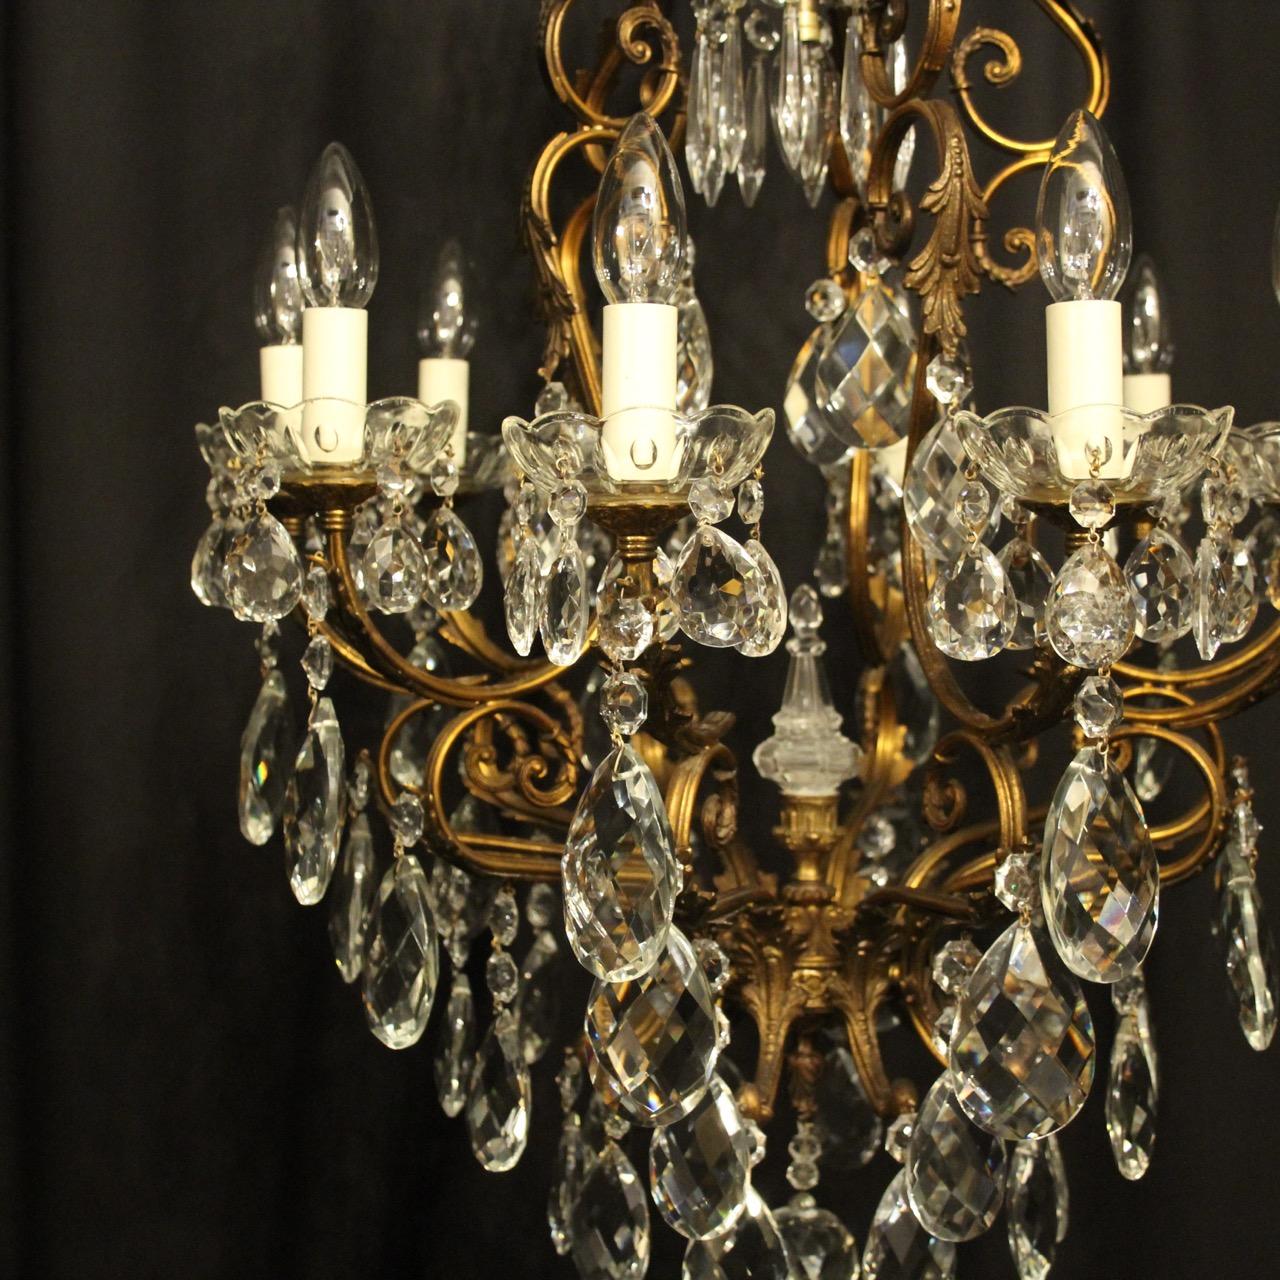 An Italian gilded brass and crystal 11 light birdcage form antique chandelier, the 10 leaf clad scrolling arms with glass bobeche drip pans, issuing from a foliated cage form interior with a single inverted light fitting and prismatic spike,